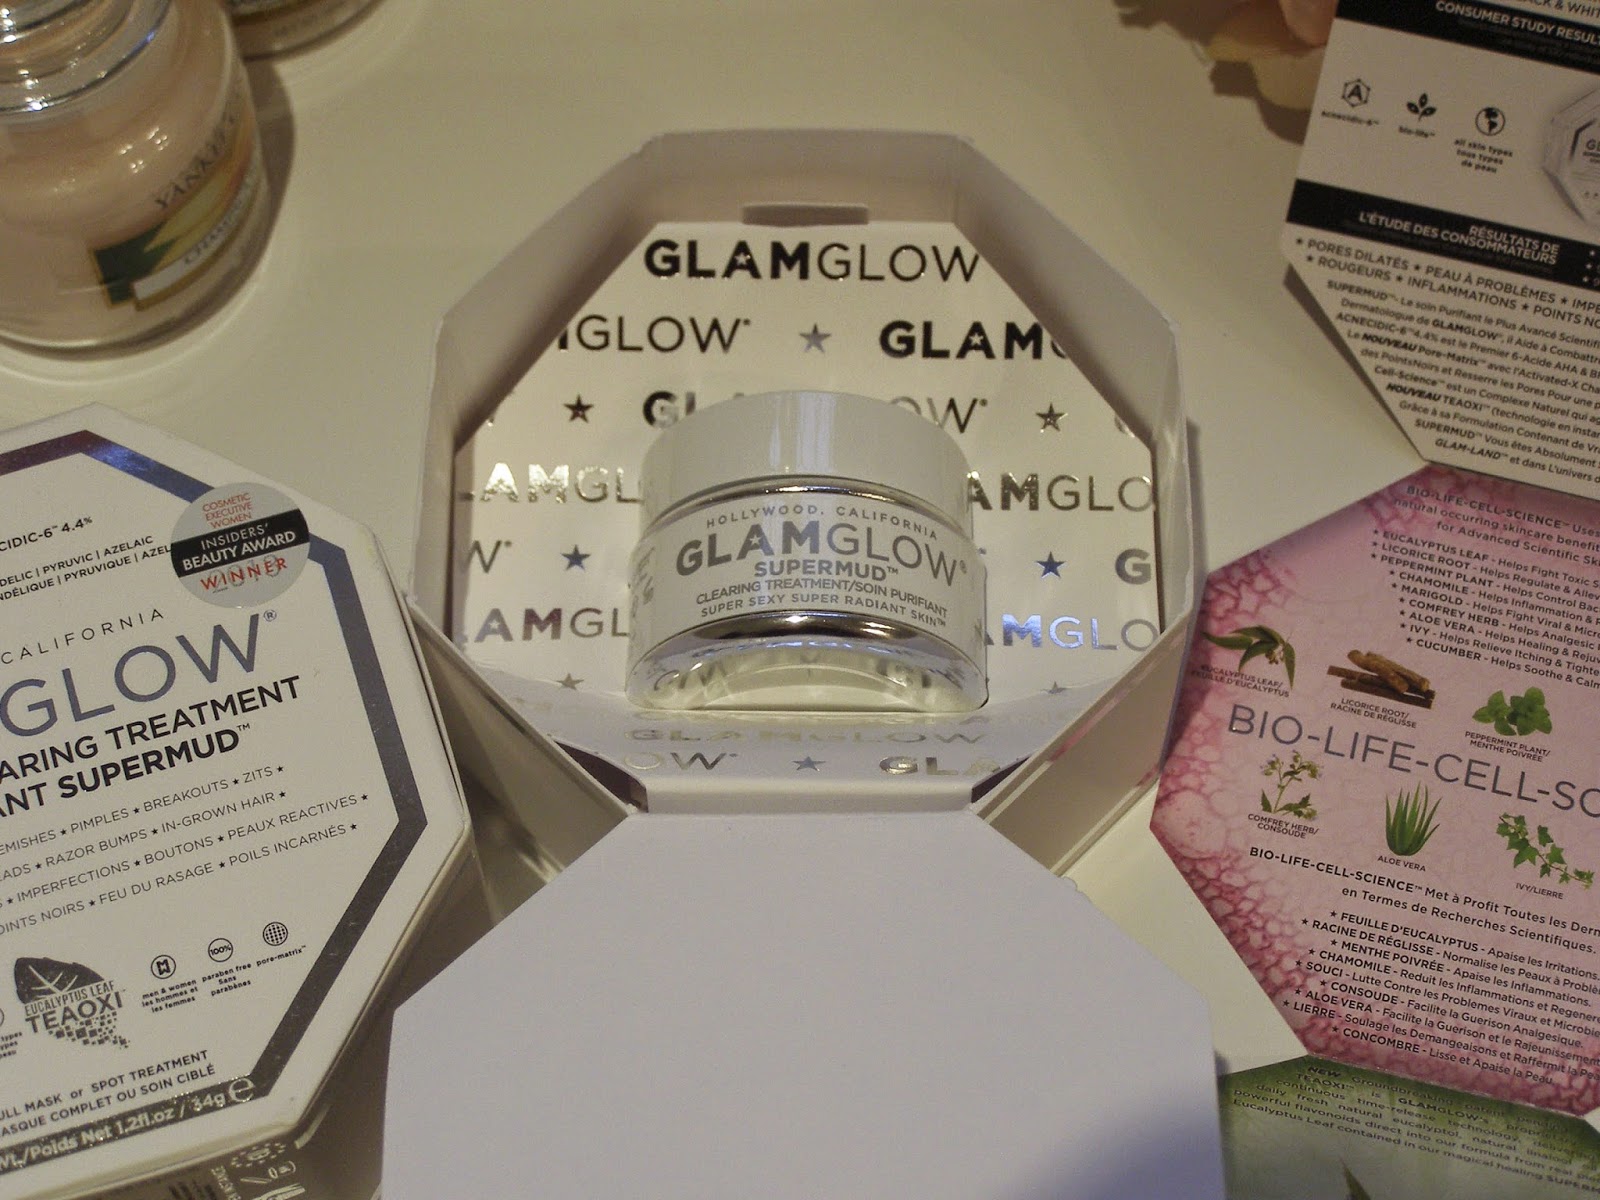 Glamglow Super mud cleaning treatment 